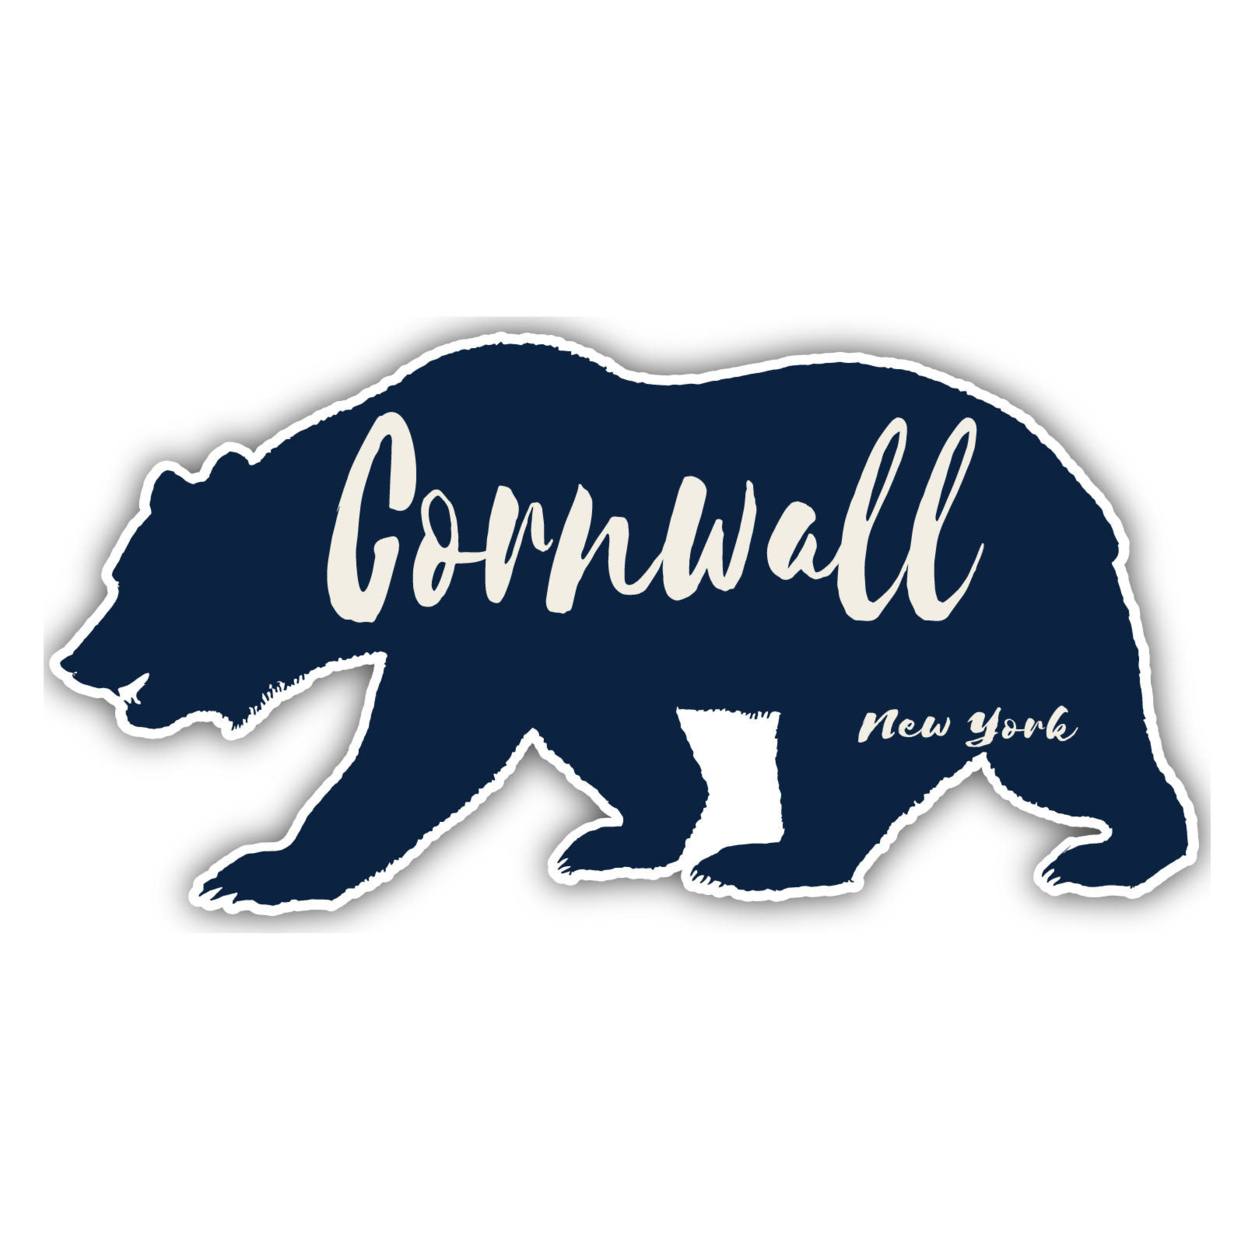 Cornwall New York Souvenir Decorative Stickers (Choose Theme And Size) - 4-Pack, 6-Inch, Bear